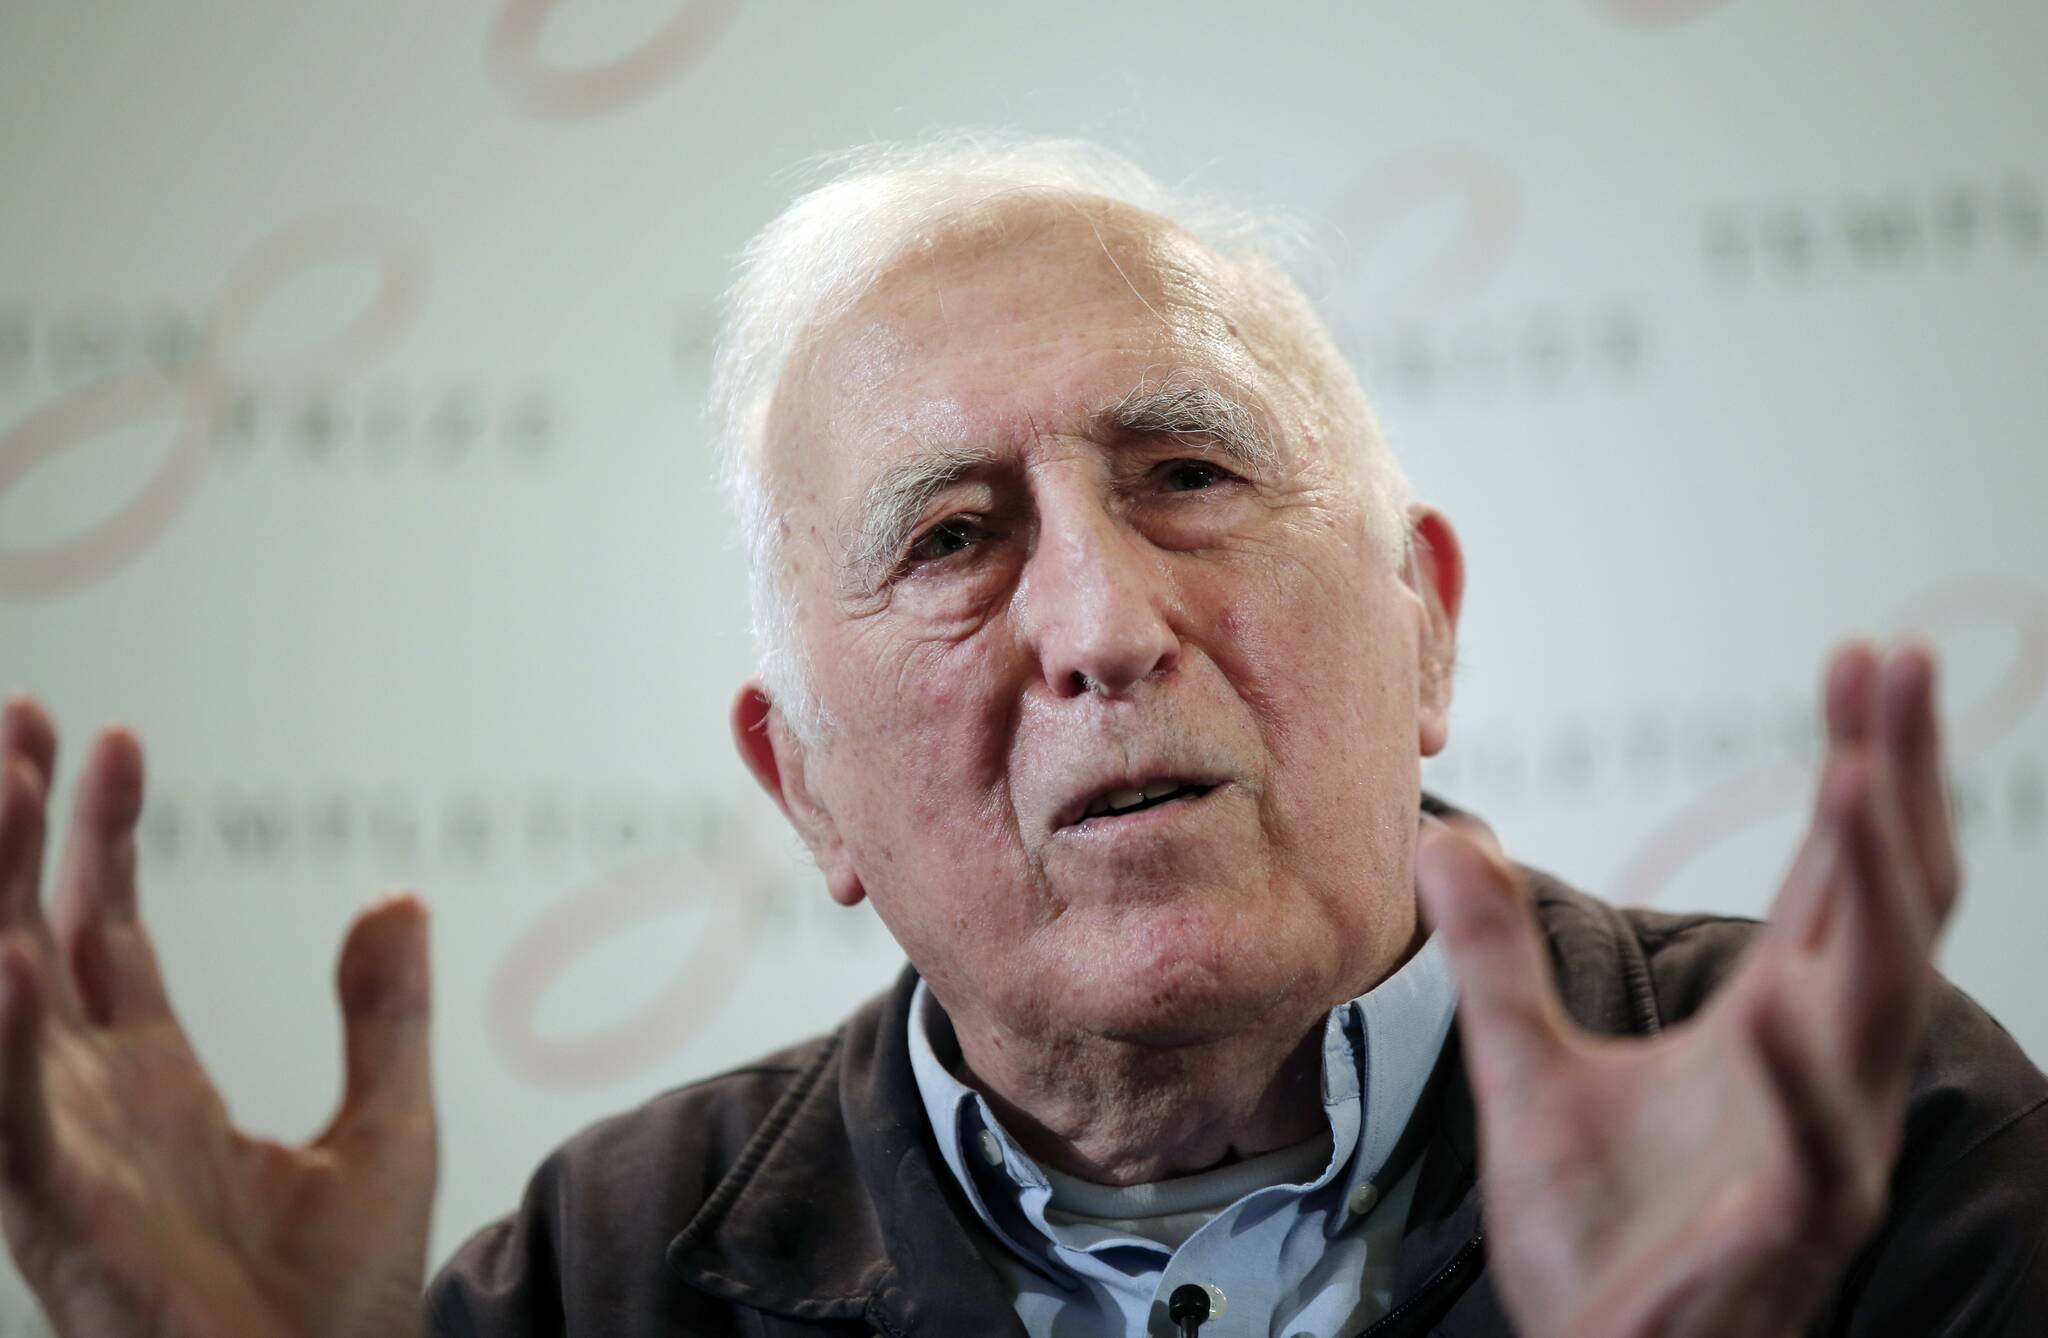 In this file photo dated Wednesday, March 11, 2015, showing Jean Vanier, the founder of L’ARCHE, an international network of communities where people with and without intellectual disabilities live and work together, in central London. THE CANADIAN PRESS/AP/Lefteris Pitarakis, FILE